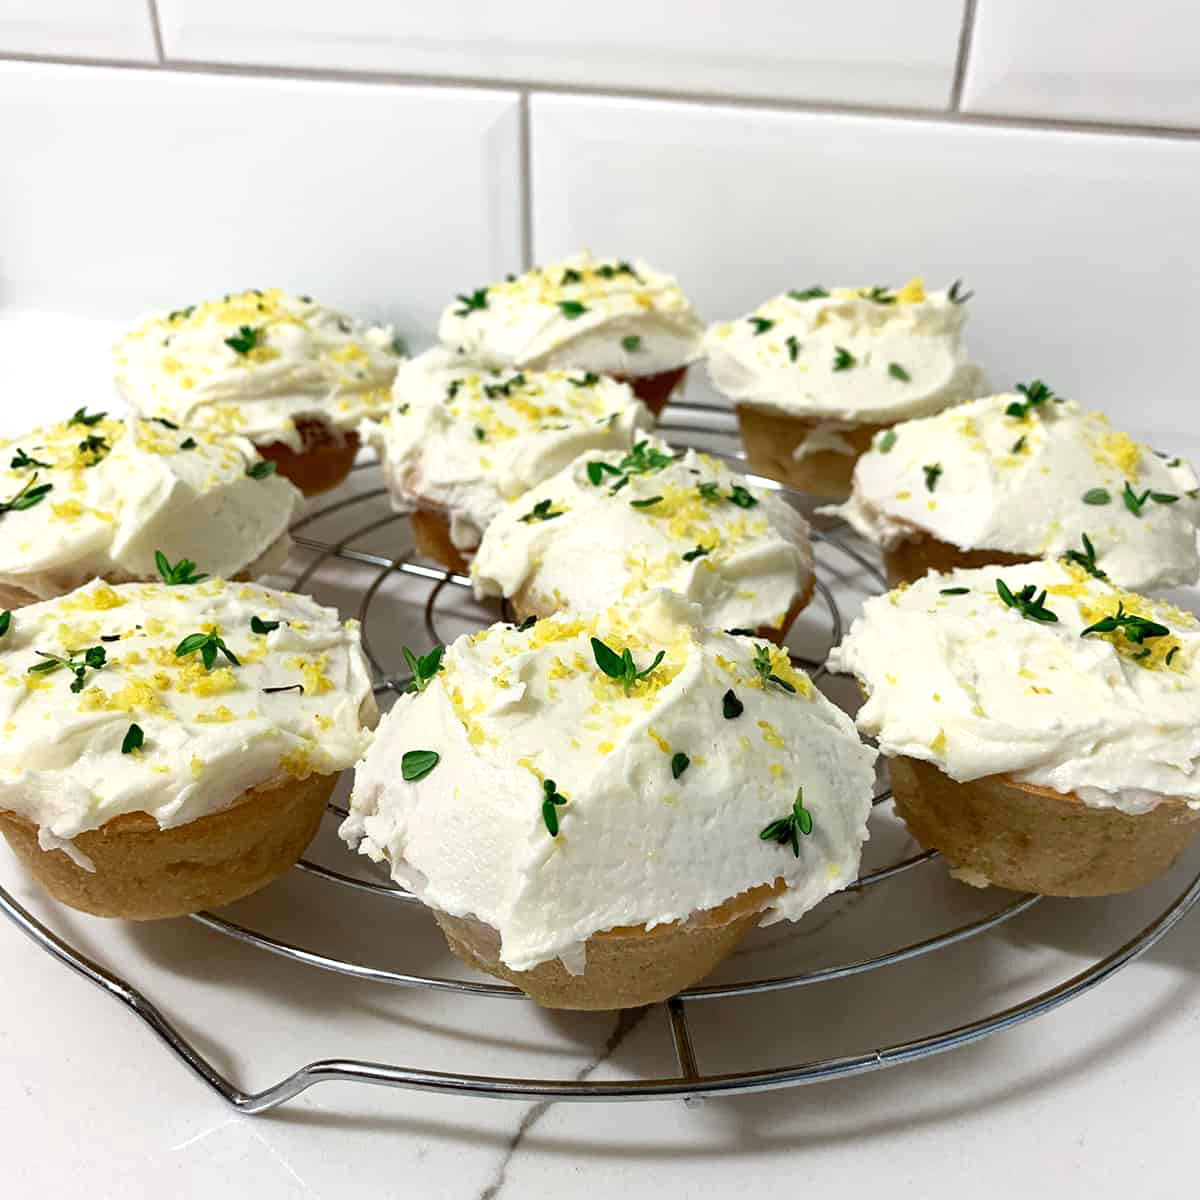 cup cakes with white frosting, lemon zest and thyme on top